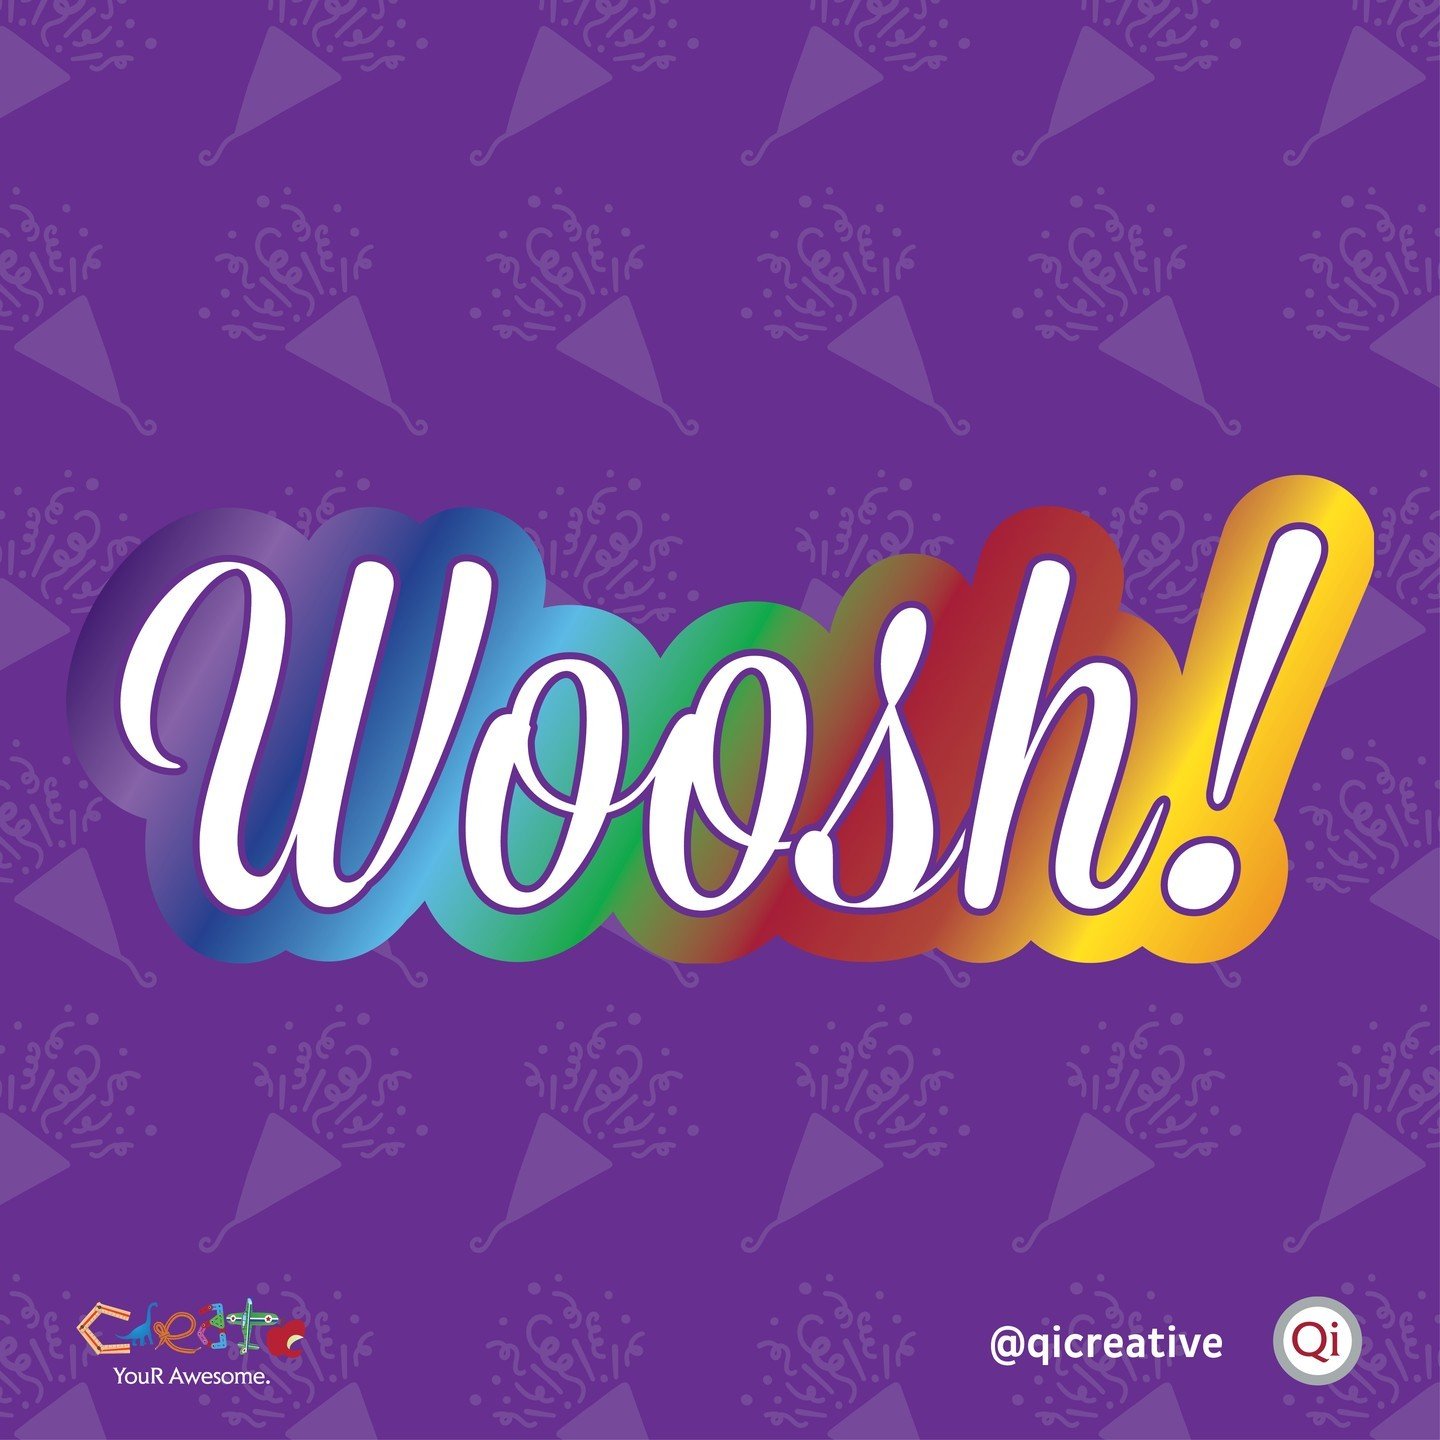 Did you know what Woosh! stands for? We Open Opportunities Serving Hope. 🌟 We use this word within Qi Creative to share energy, express support and compassion for one another, and celebrate achievements and special moments. �Because each life is wor